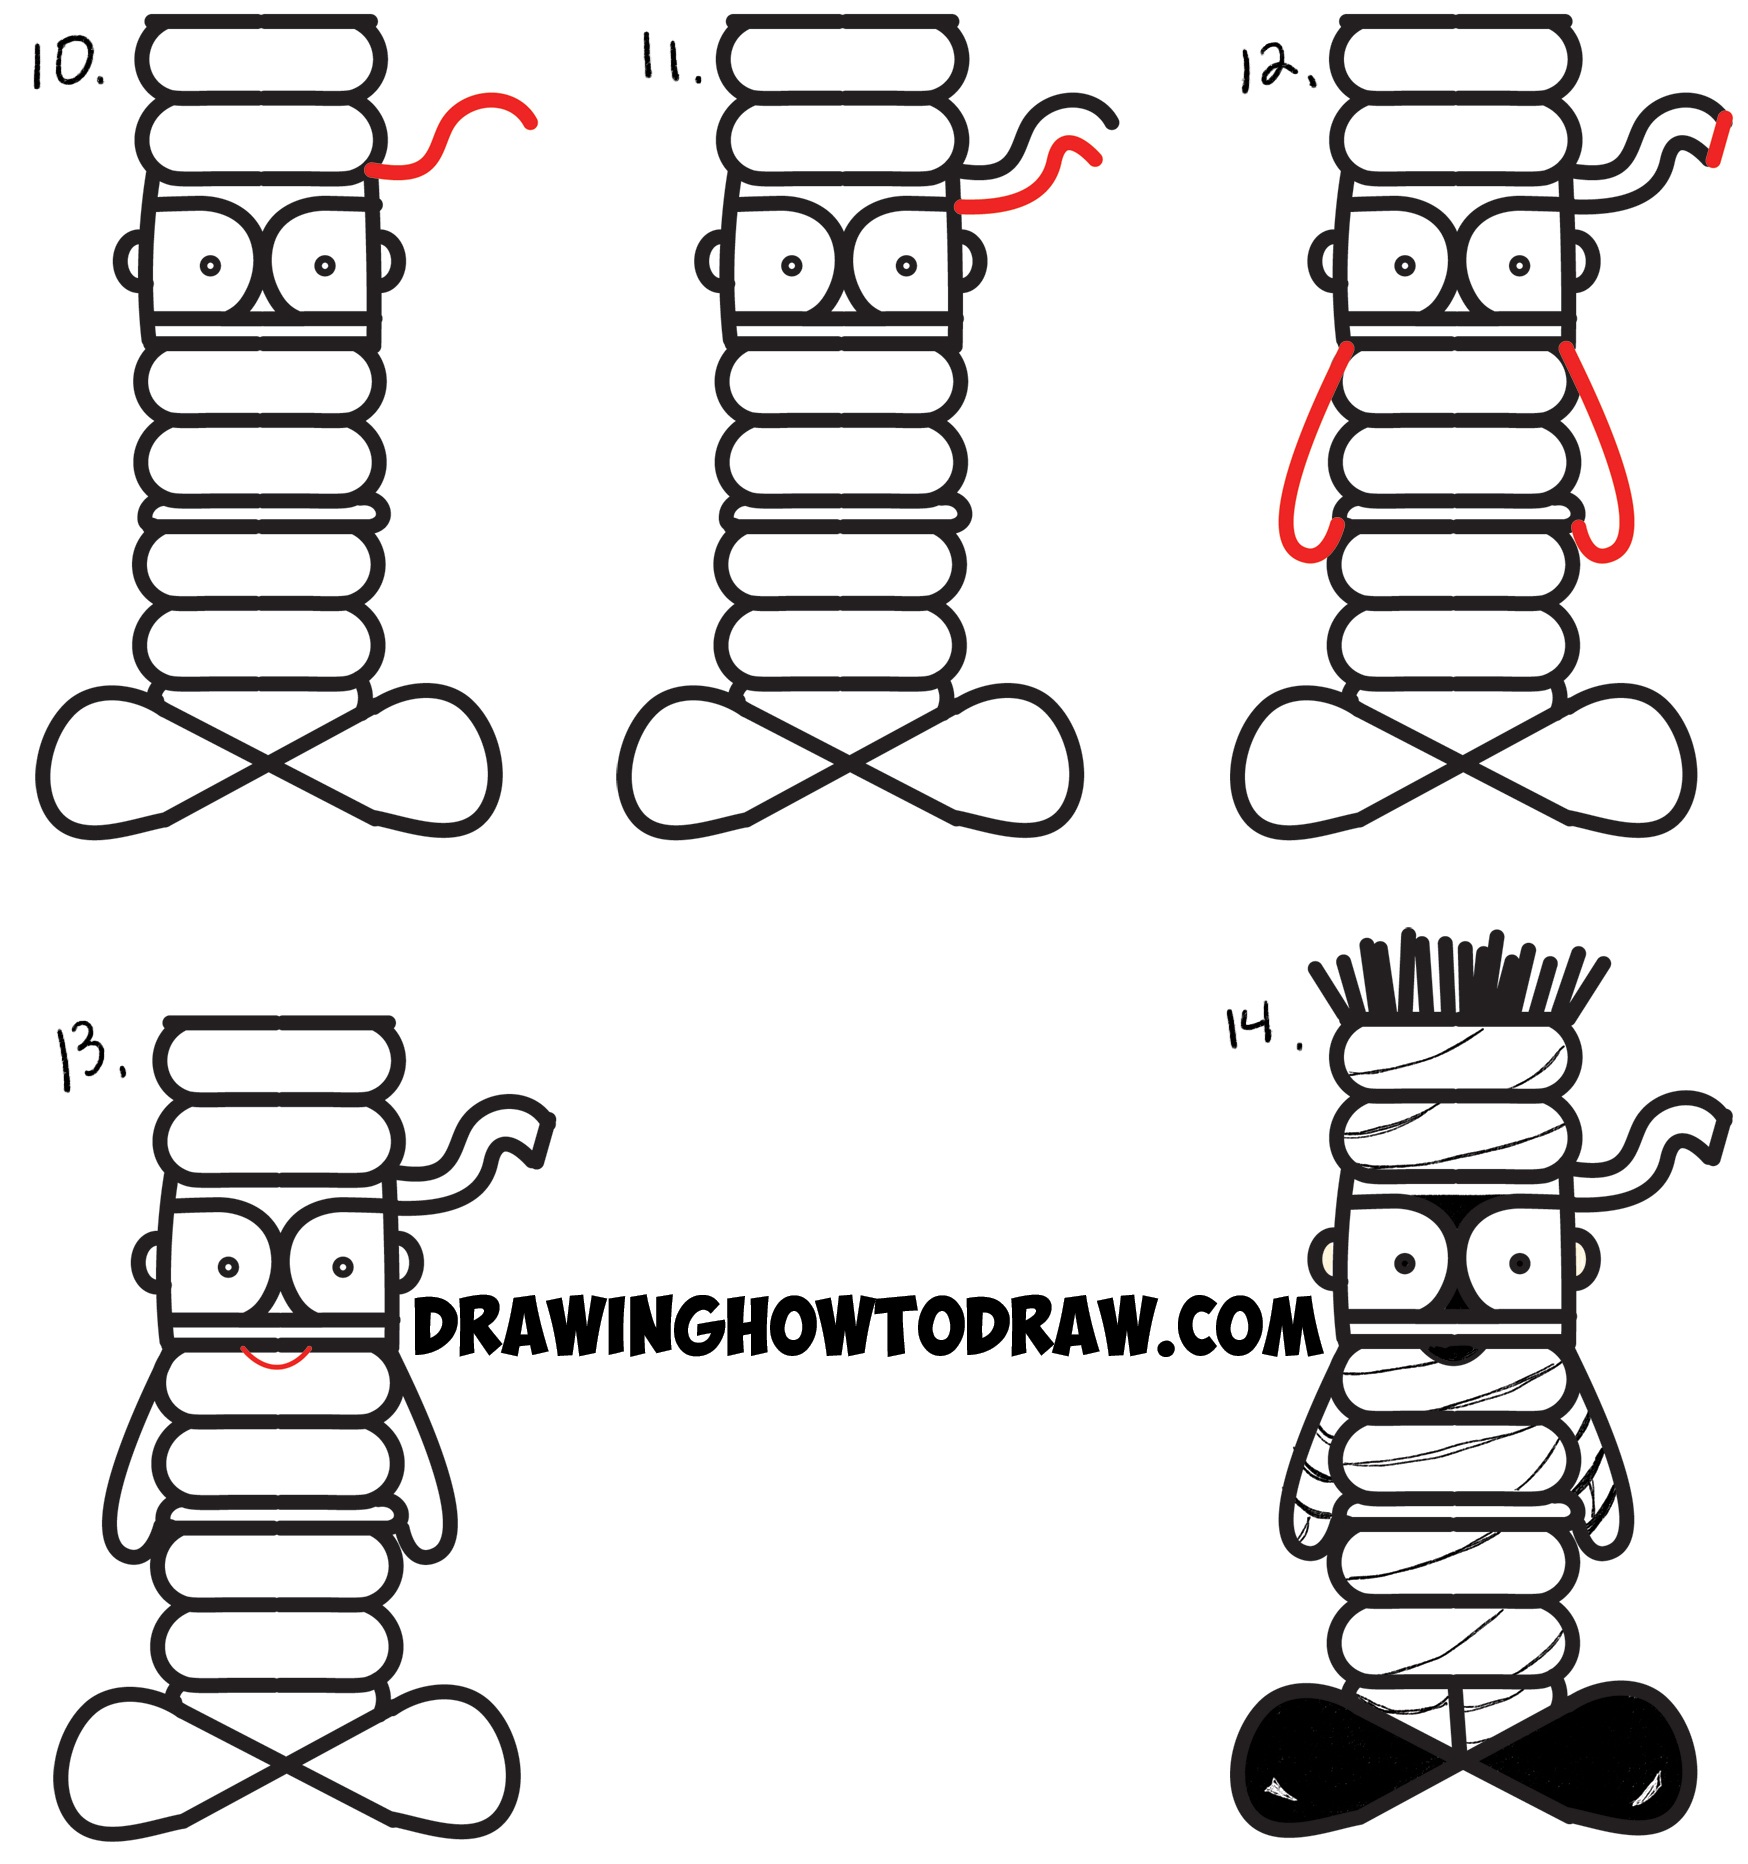 Learn How to Draw a Cartoon Mummy Word Toon / Cartoon - Simple Steps Drawing Lesson for Kids on Halloween